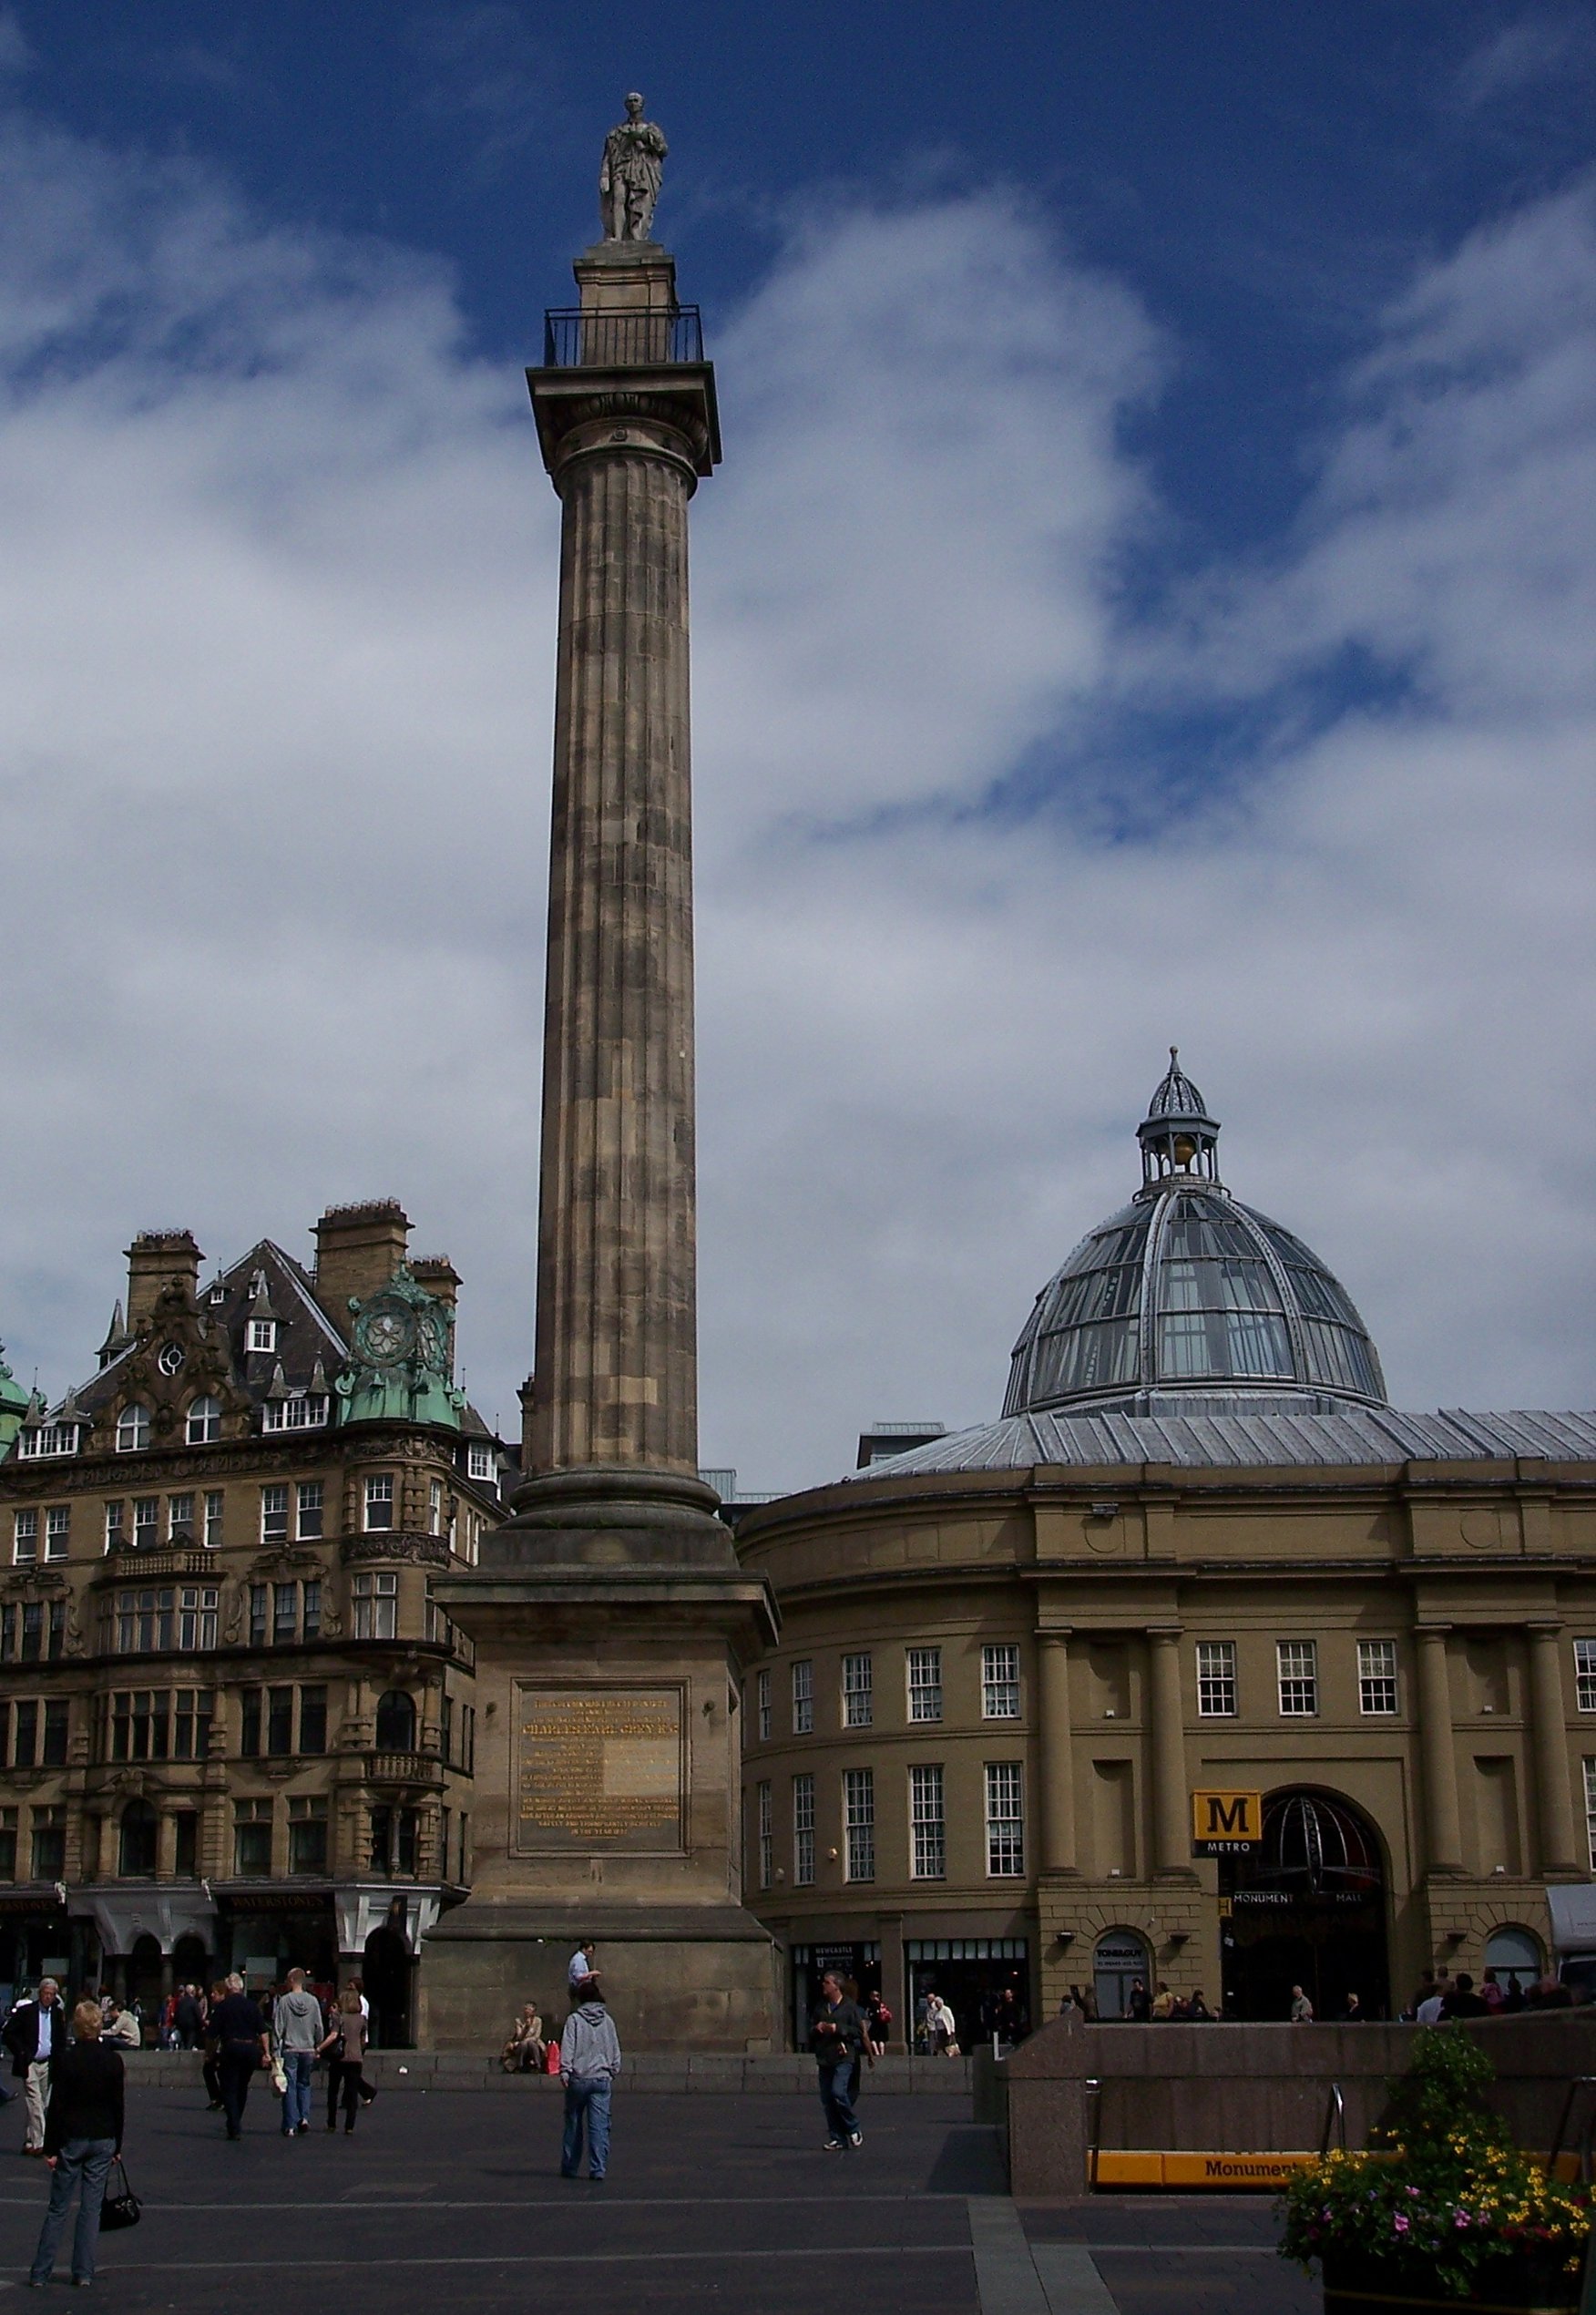 Photograph of Grey's Monument